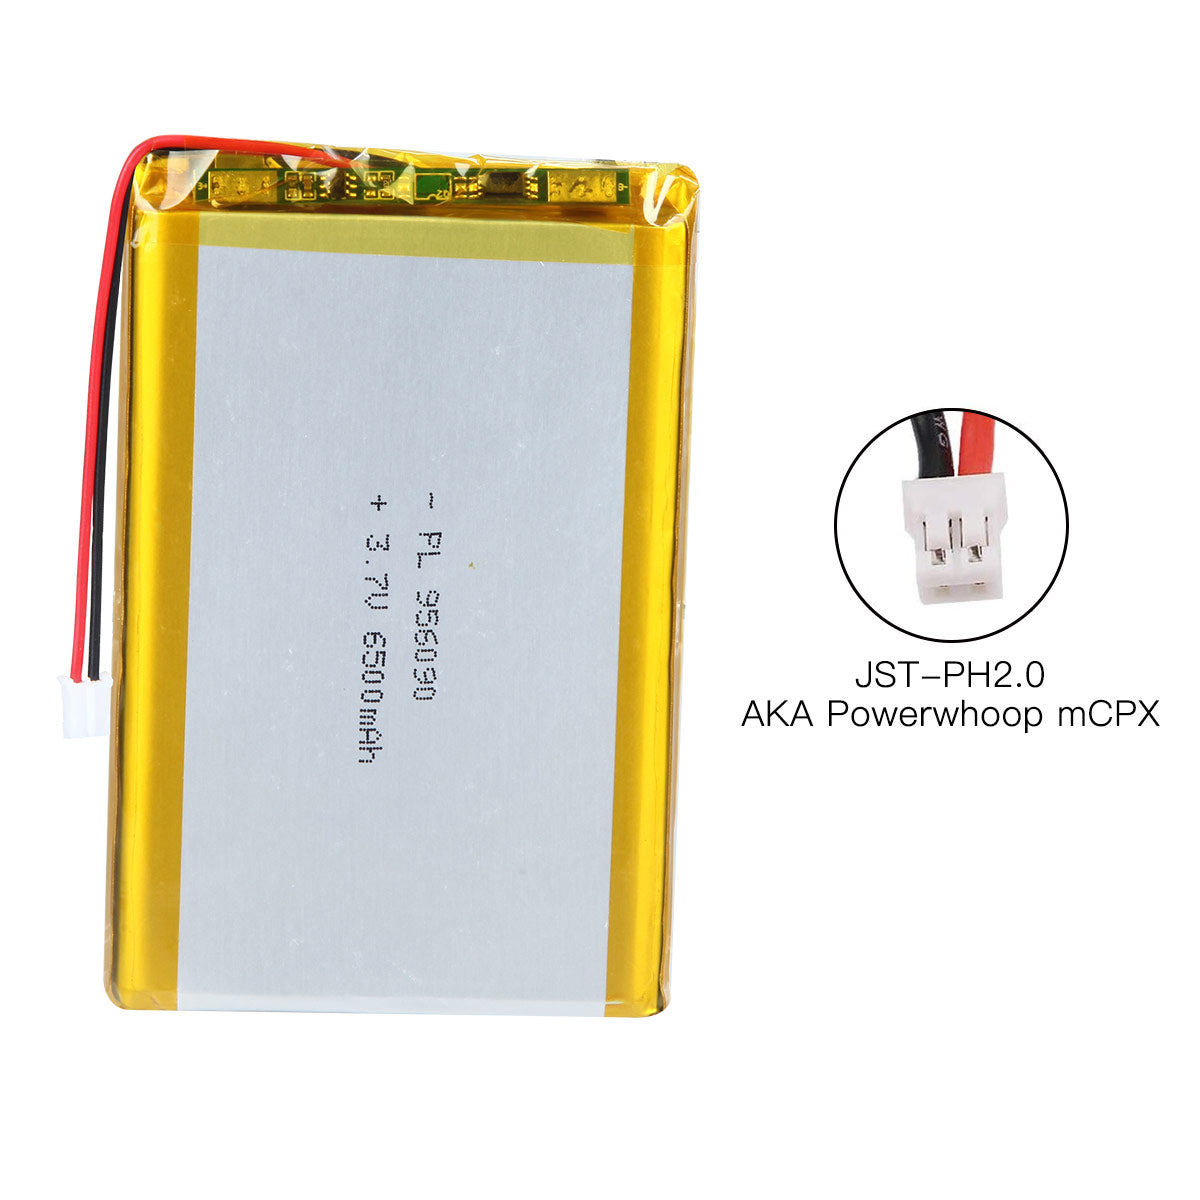 YDL 3.7V 6500mAh 956090 Rechargeable Lithium Polymer Battery Length 92mm